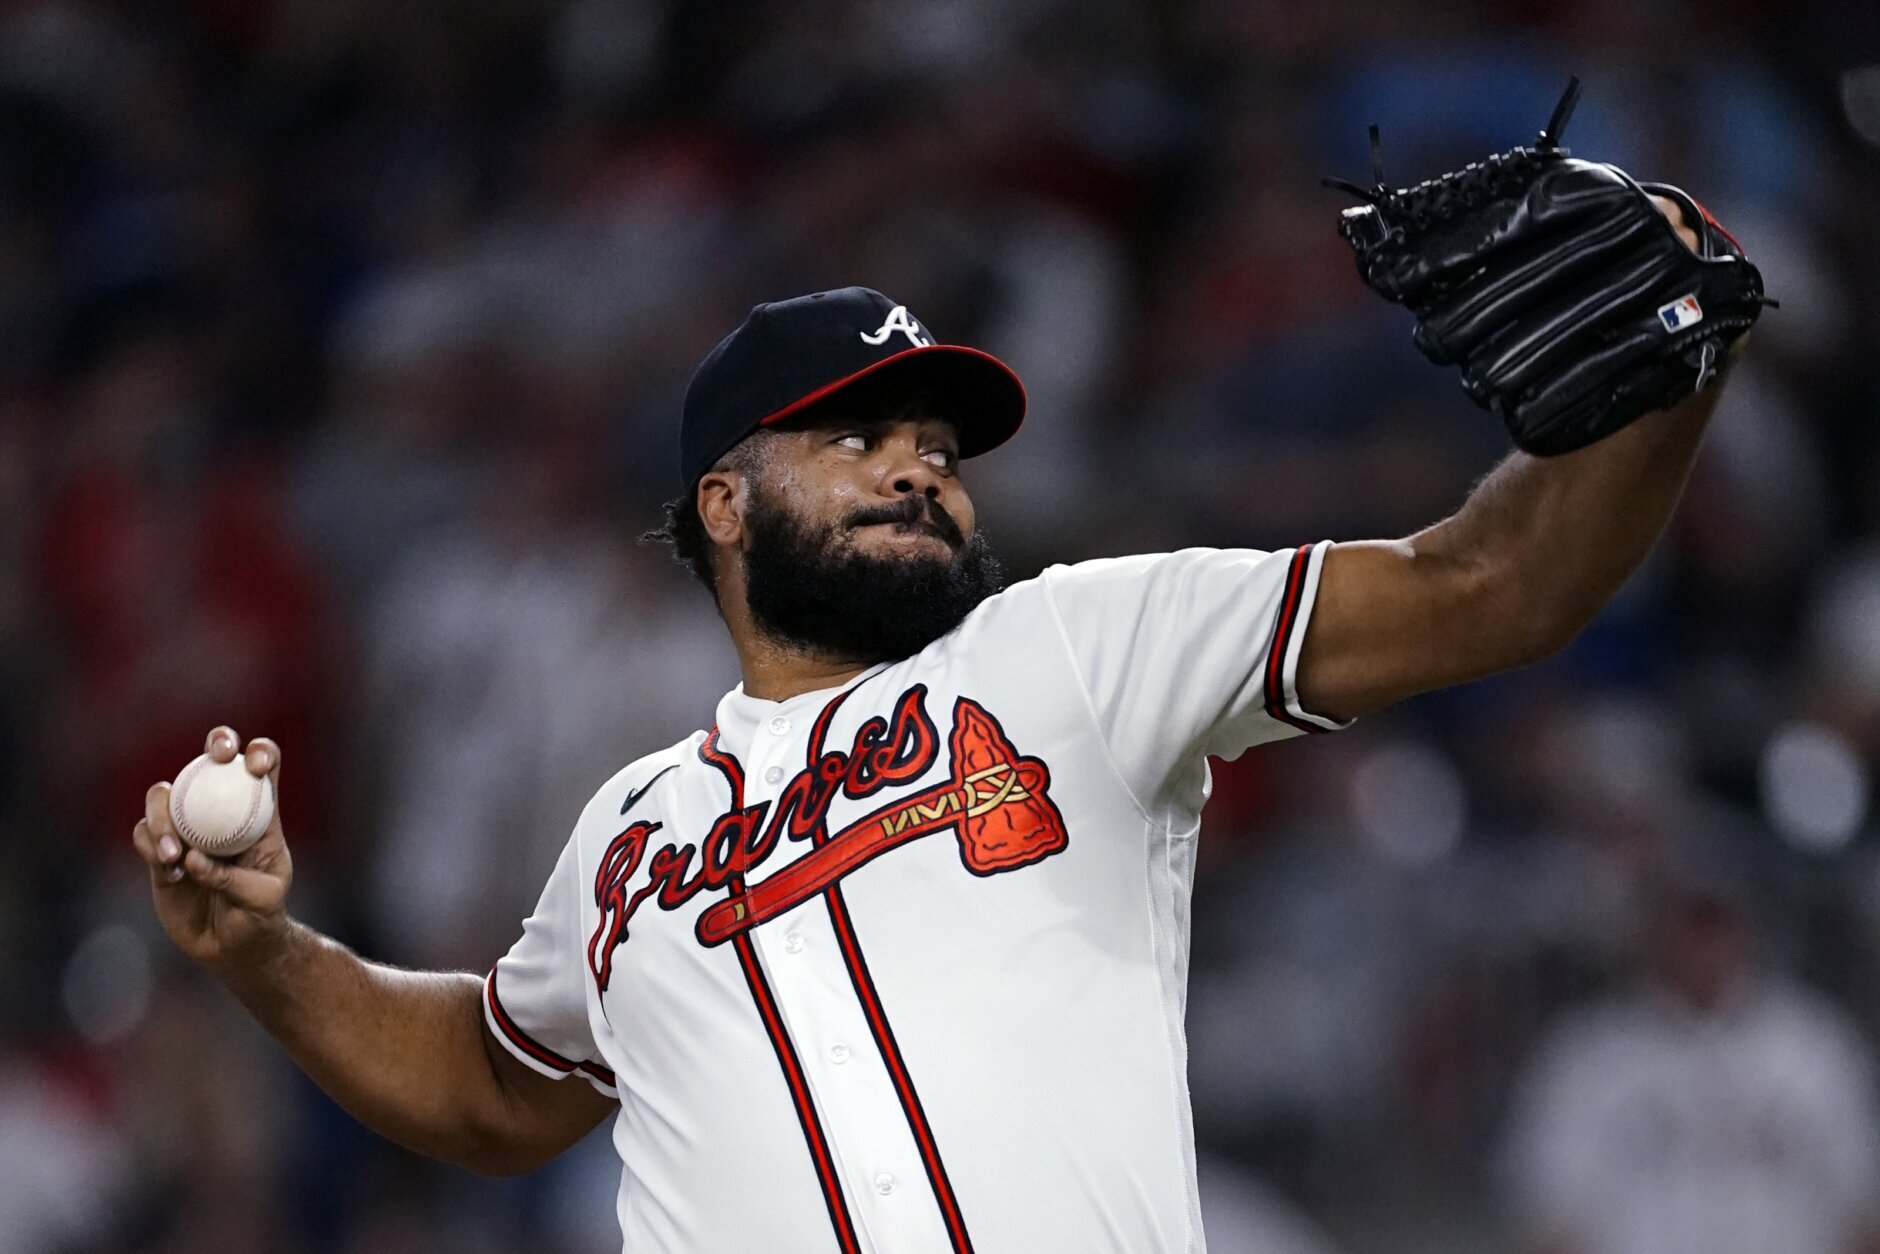 Braves fans applaud Spencer Strider as he runs through the Orioles lineup  with 10 strikeouts: Better than your favourite pitcher